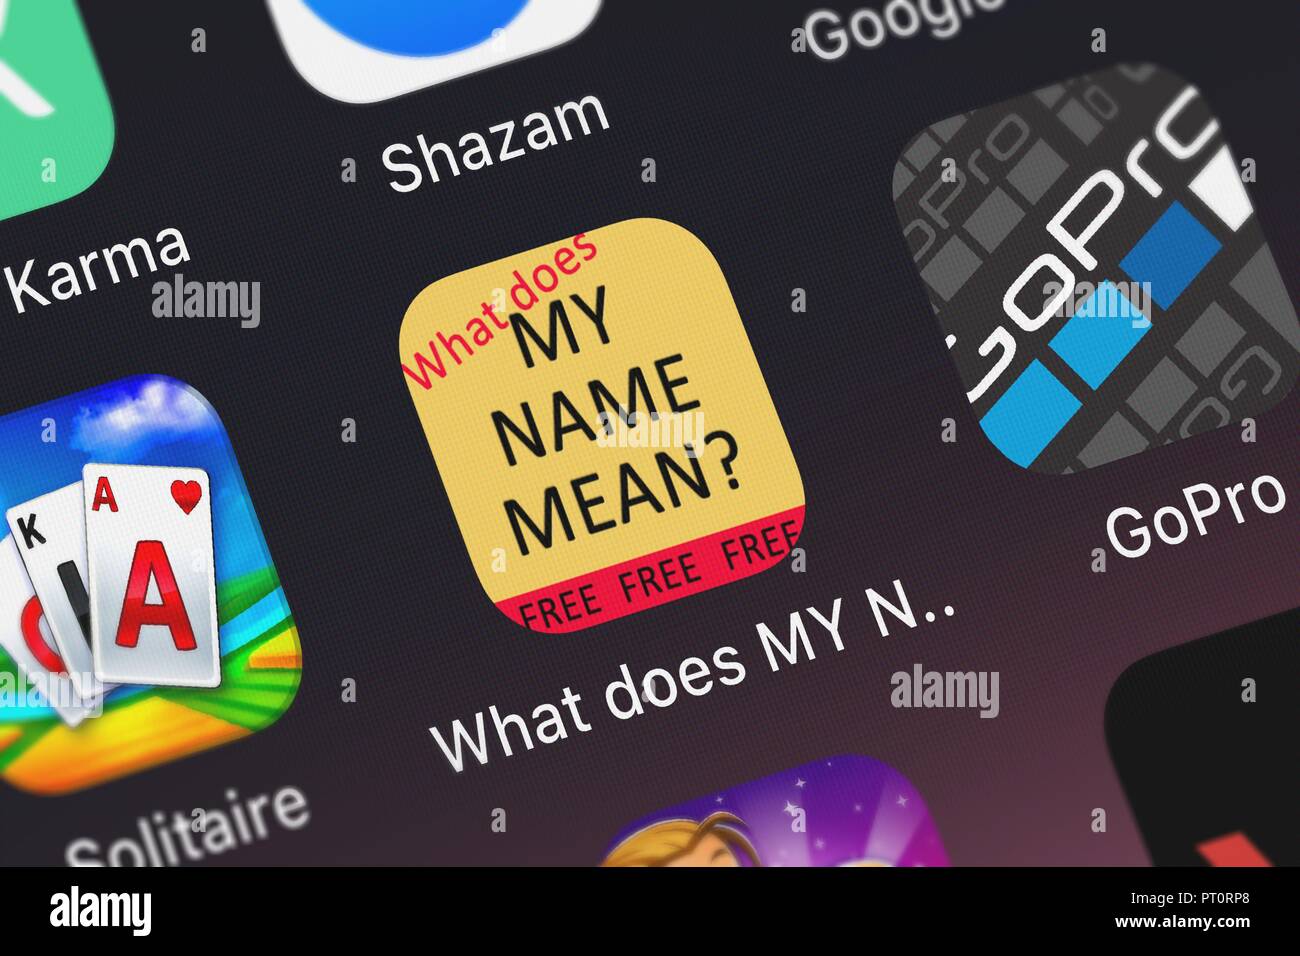 London, United Kingdom - October 05, 2018: The What does MY NAME MEAN mobile app from Indigo Penguin Limited on an iPhone screen. Stock Photo